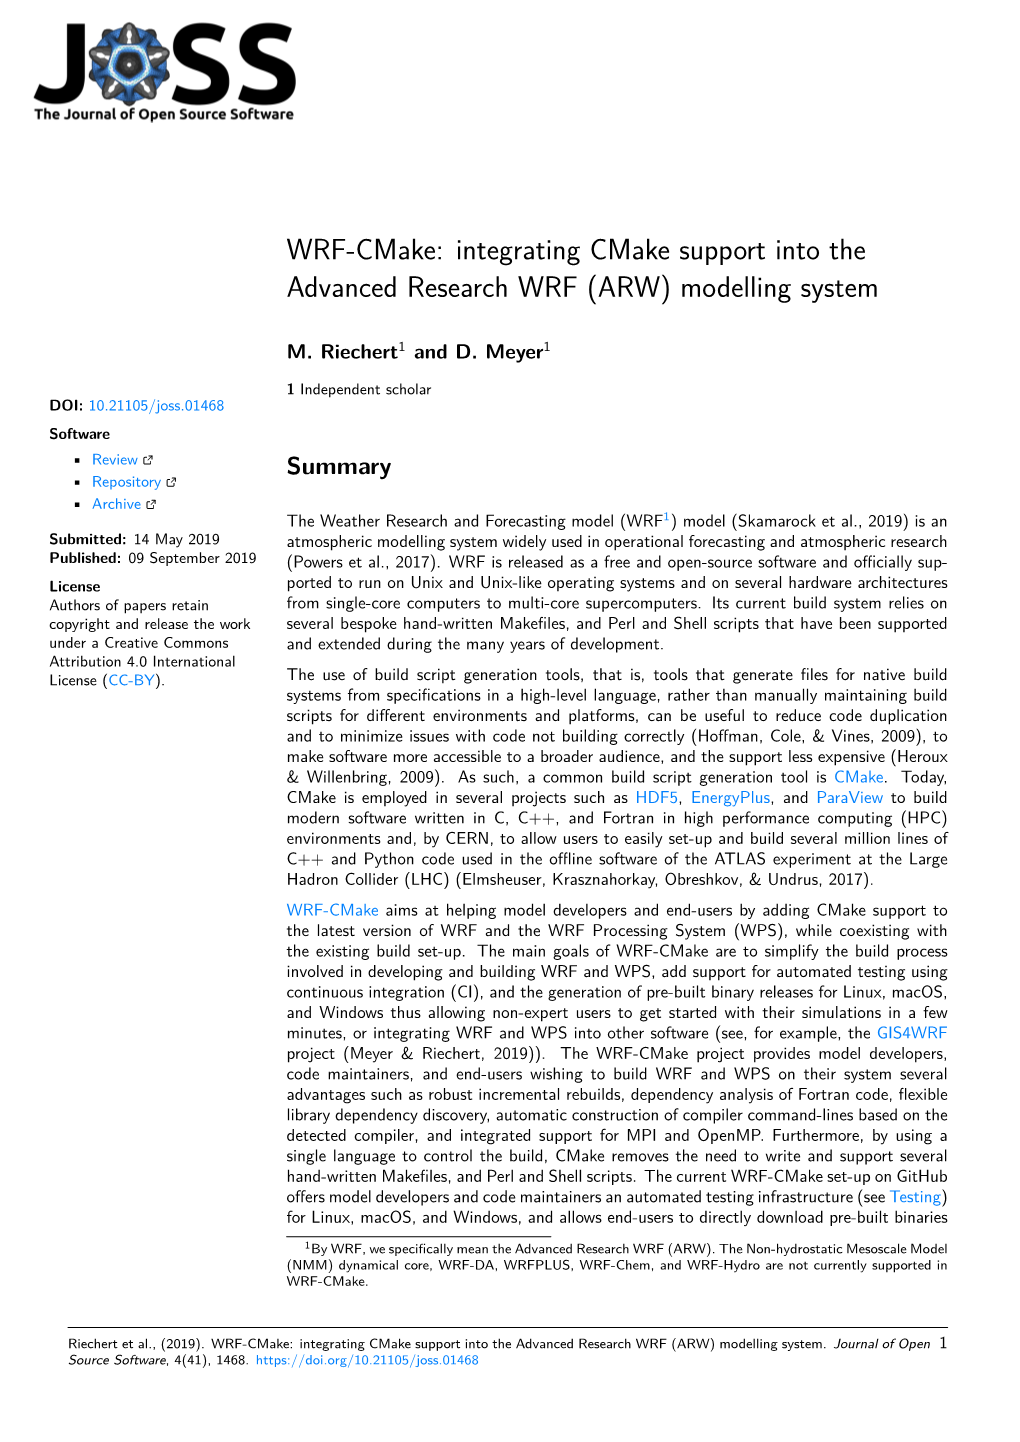 WRF-Cmake: Integrating Cmake Support Into the Advanced Research WRF (ARW) Modelling System